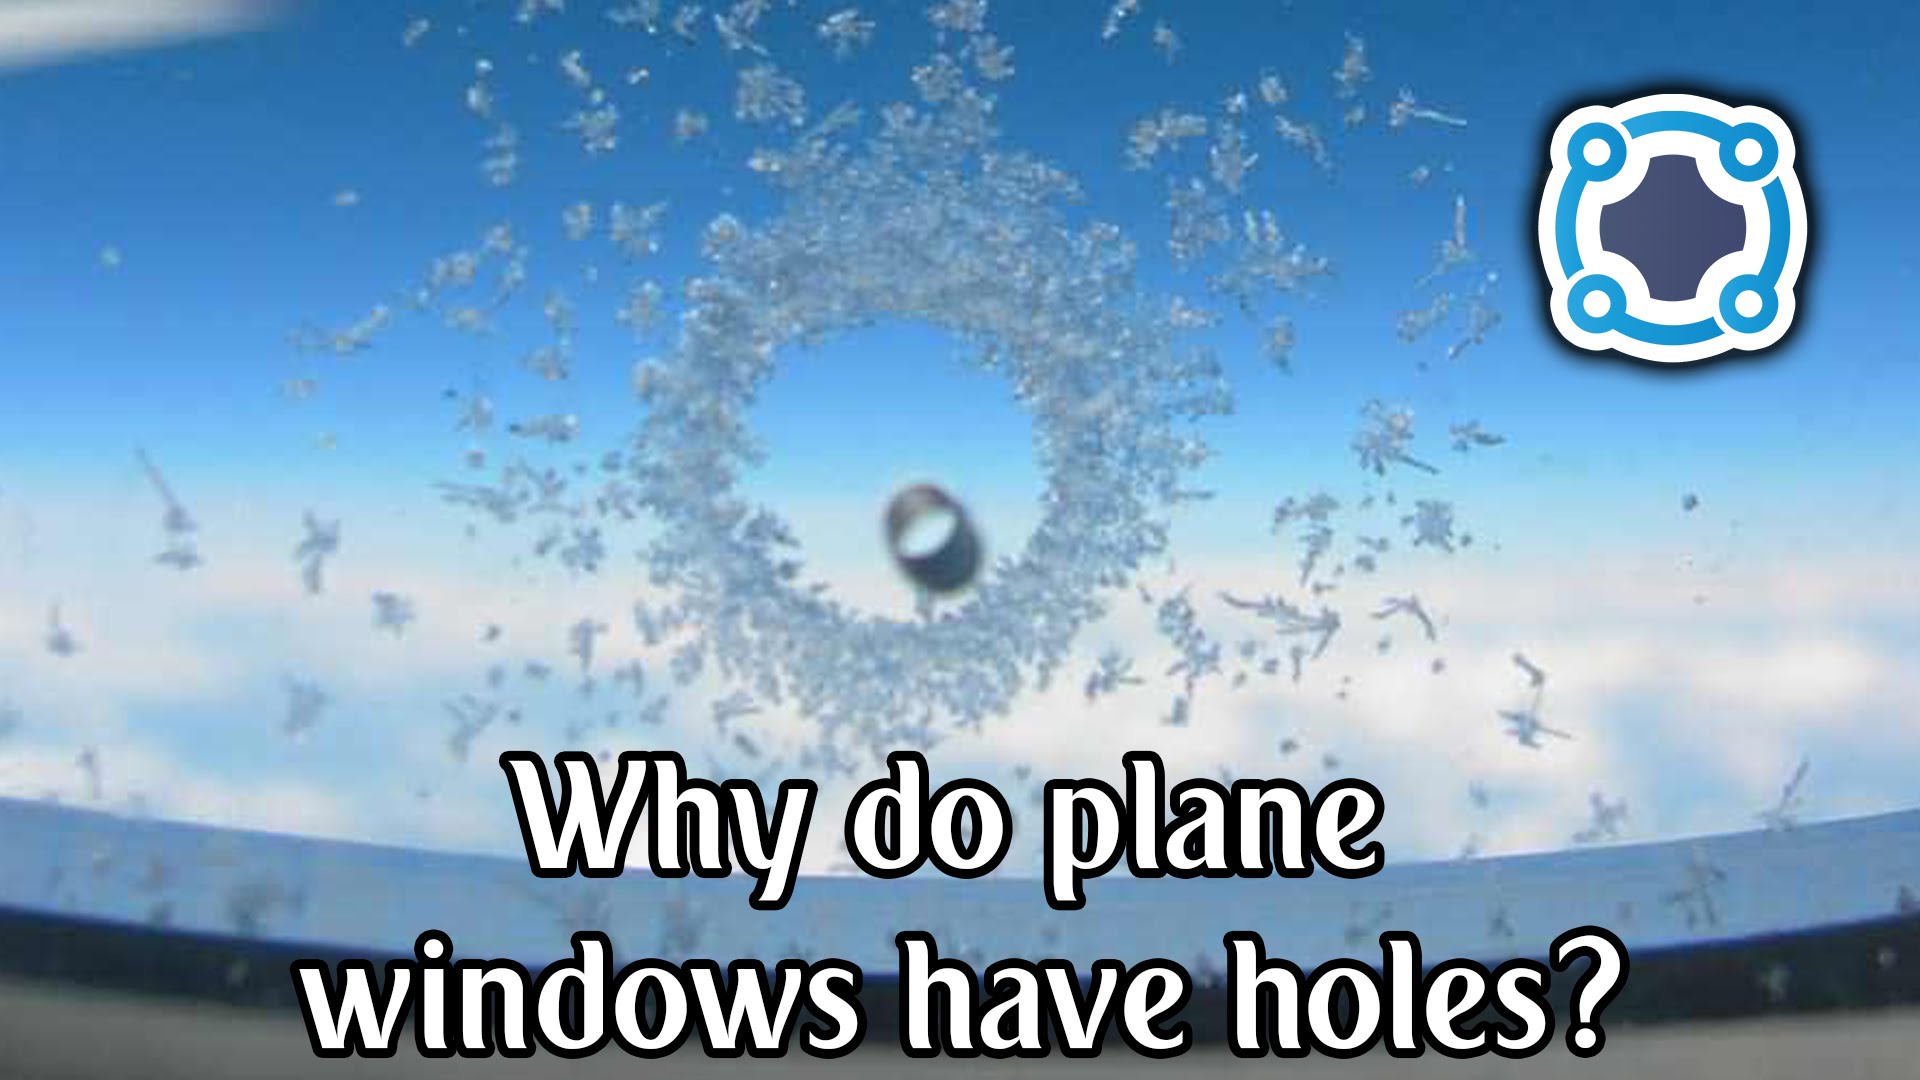 Why are there holes in airplane windows?